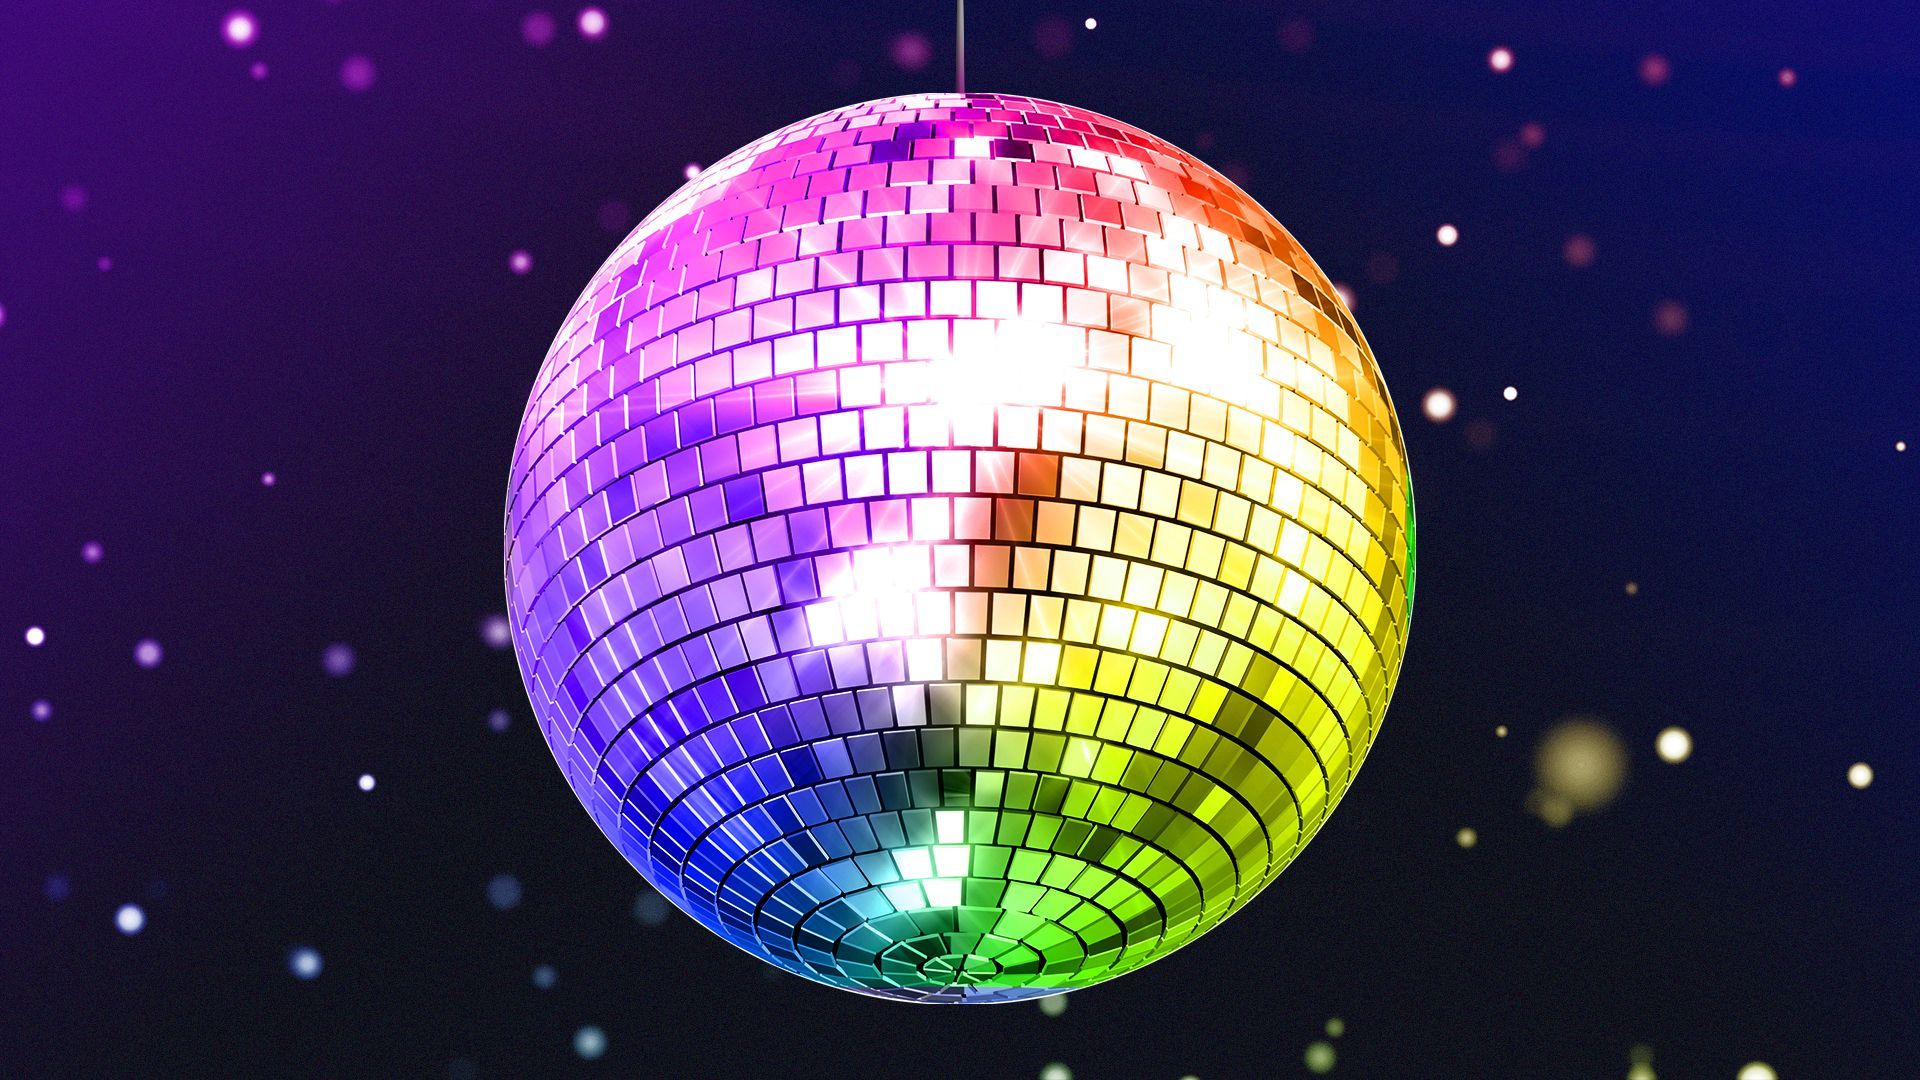 Illustration of a rainbow colored disco ball.